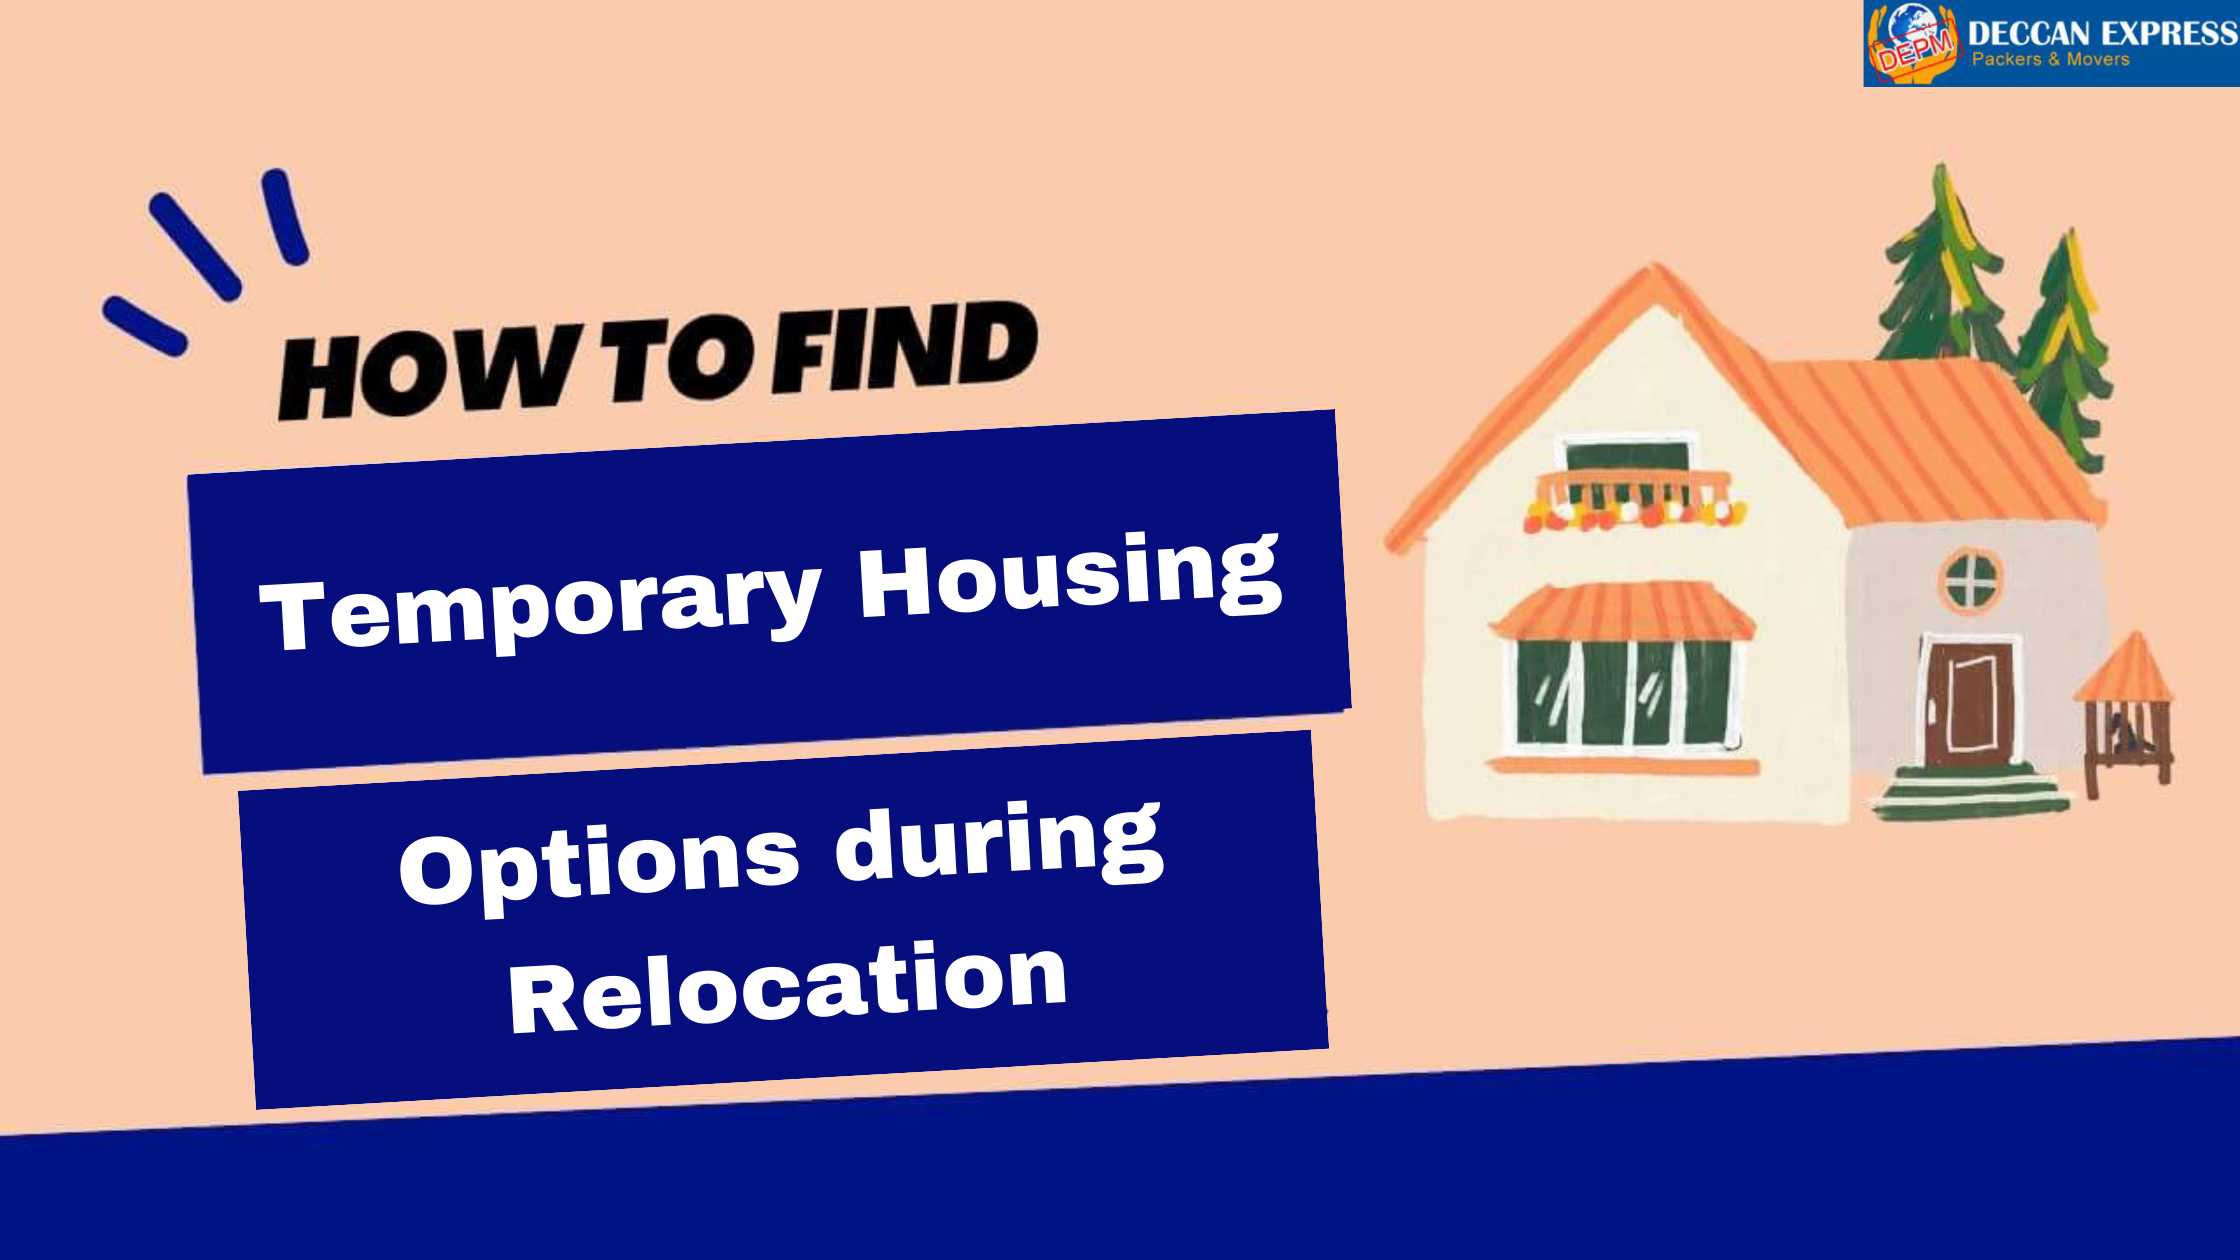 Temporary Housing Options during Relocation